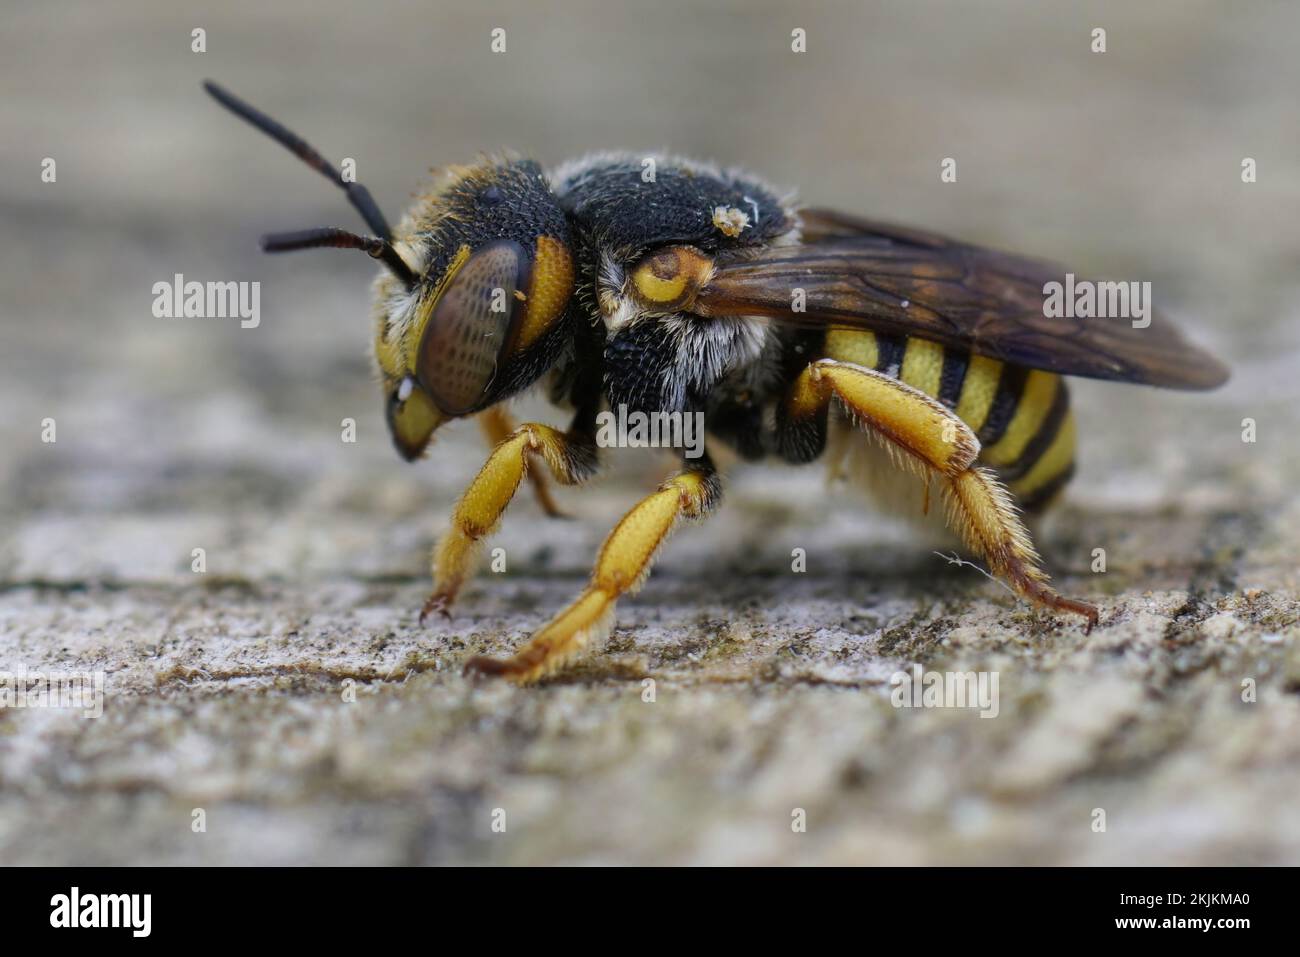 Detailed closeup on a female of the Grohmann's Yellow-Resin Bee, Icteranthidium grohmanni Stock Photo